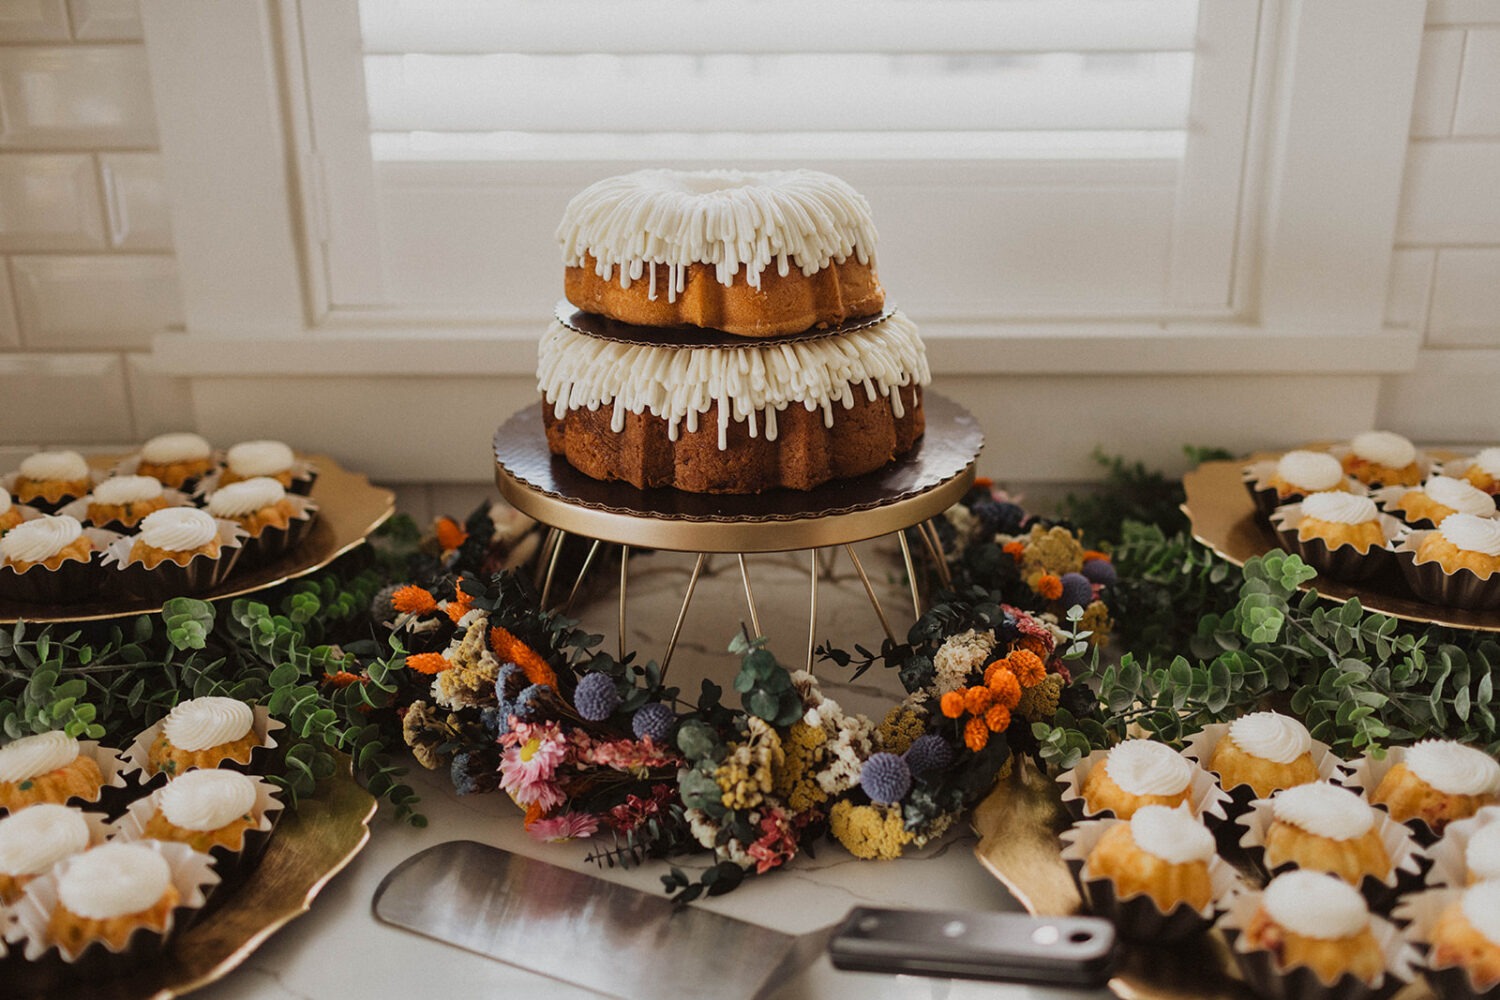 cakes and cupcakes with wildflowers at wedding reception